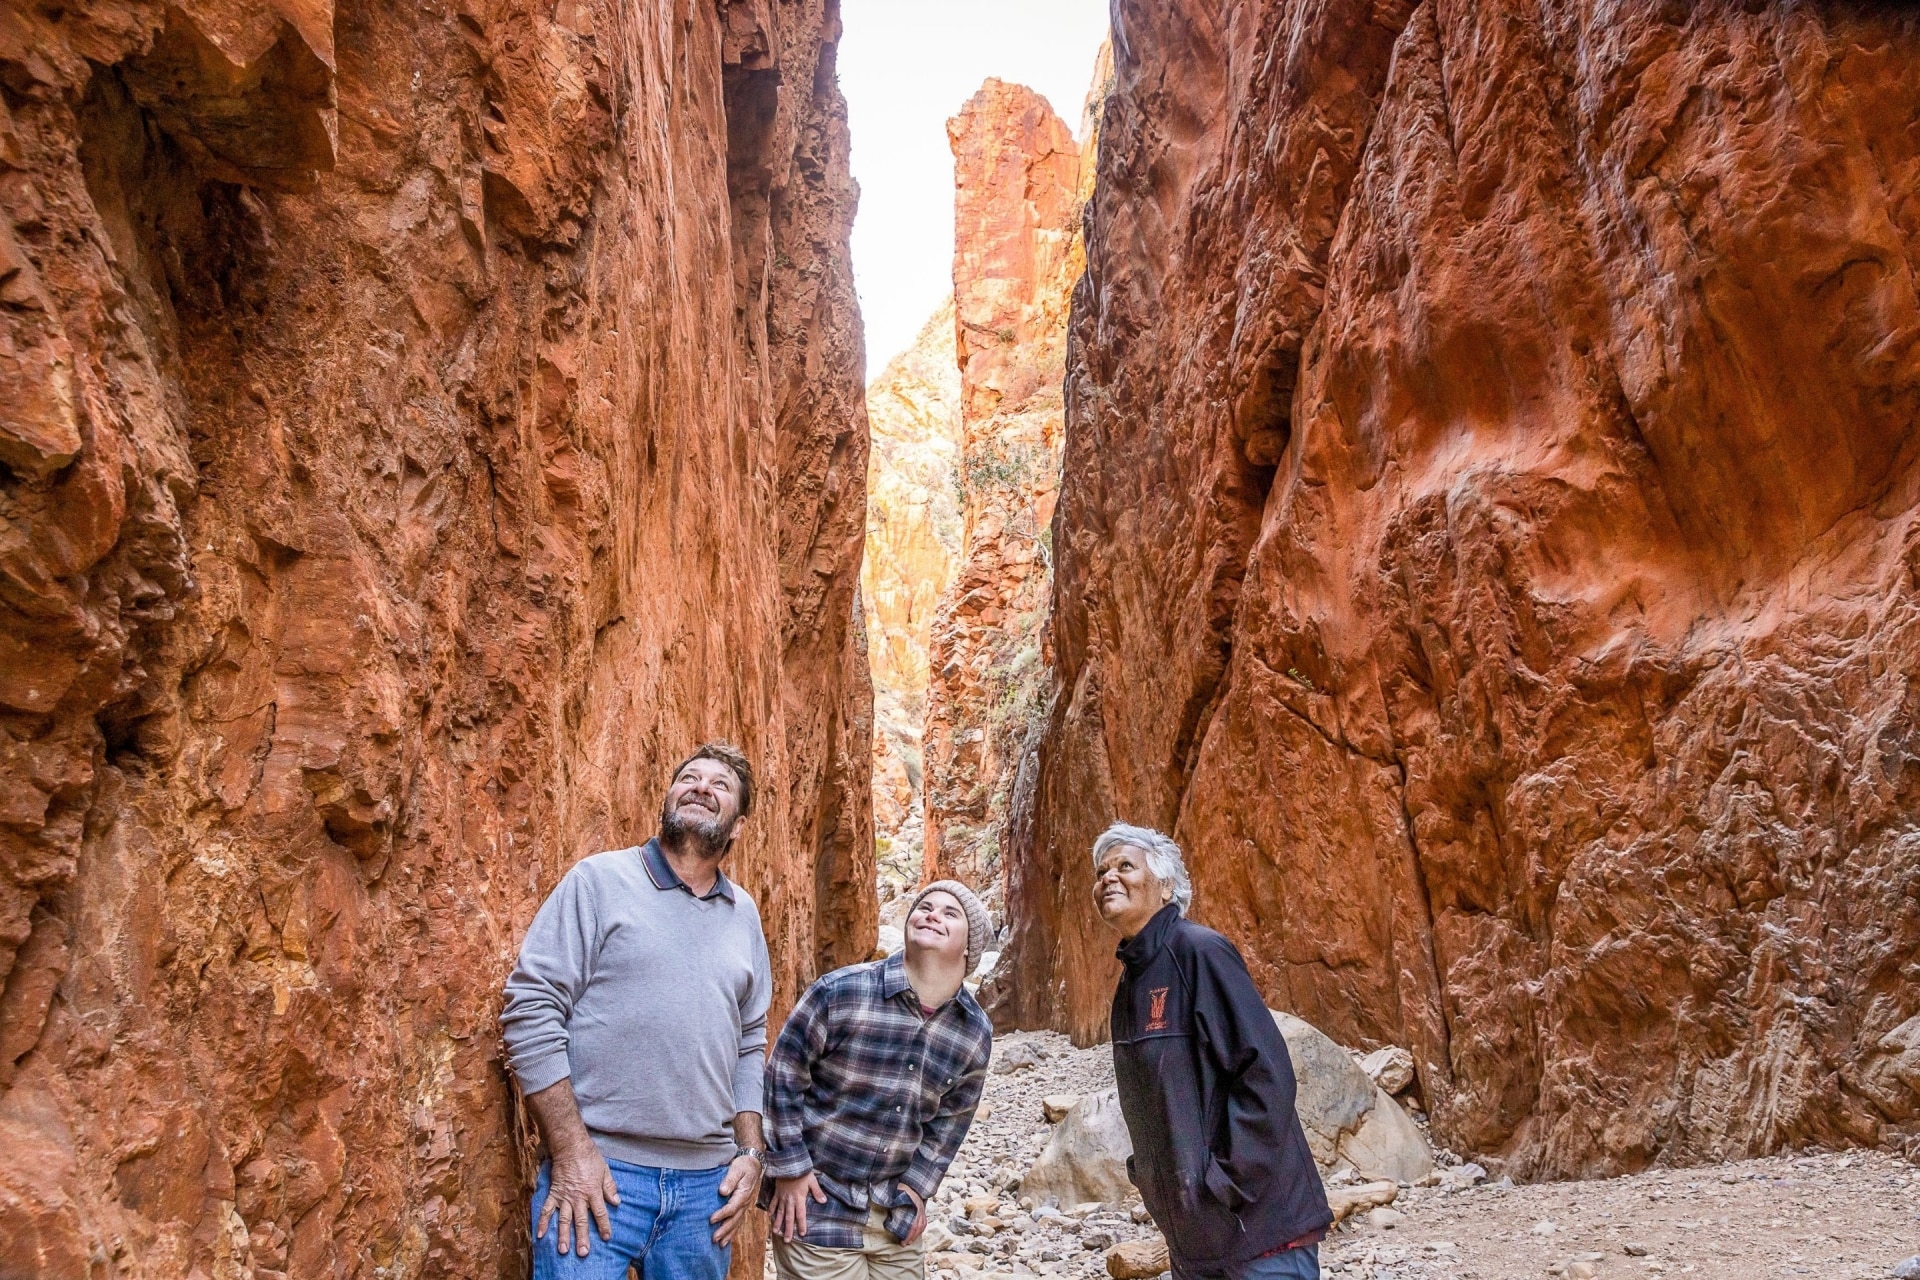 Man with neurodivergence accompanied by another man and a tour guide at Standley Chasm, West MacDonnell Ranges, Northern Territory © Tourism NT/Helen Orr